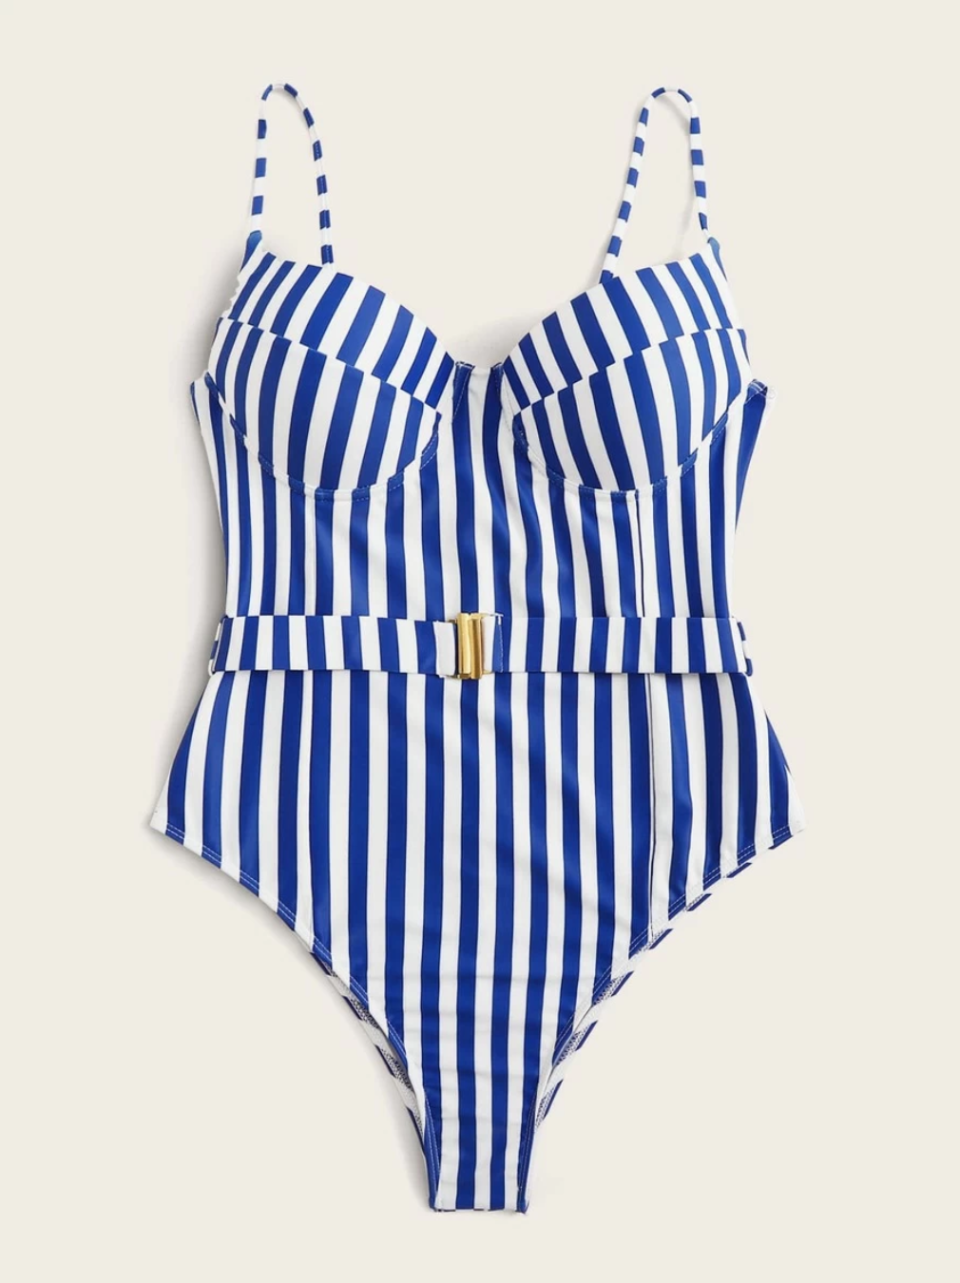 Striped Belted One Piece Swimsuit. Image via Shein.